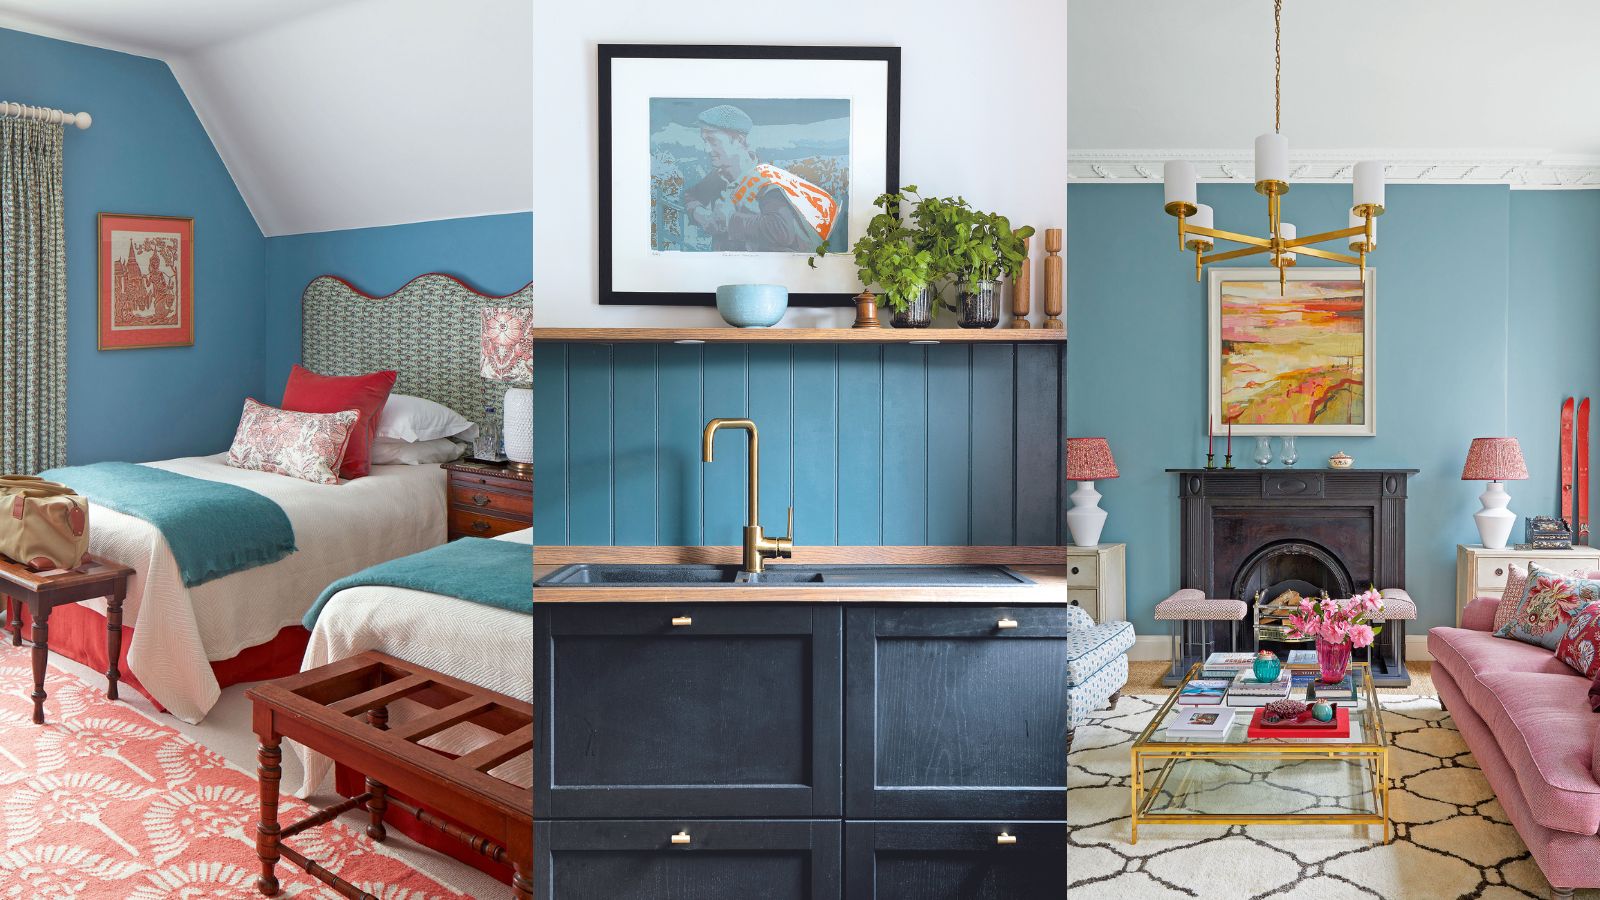 13 Colors That Go With Navy Blue-Themed Rooms